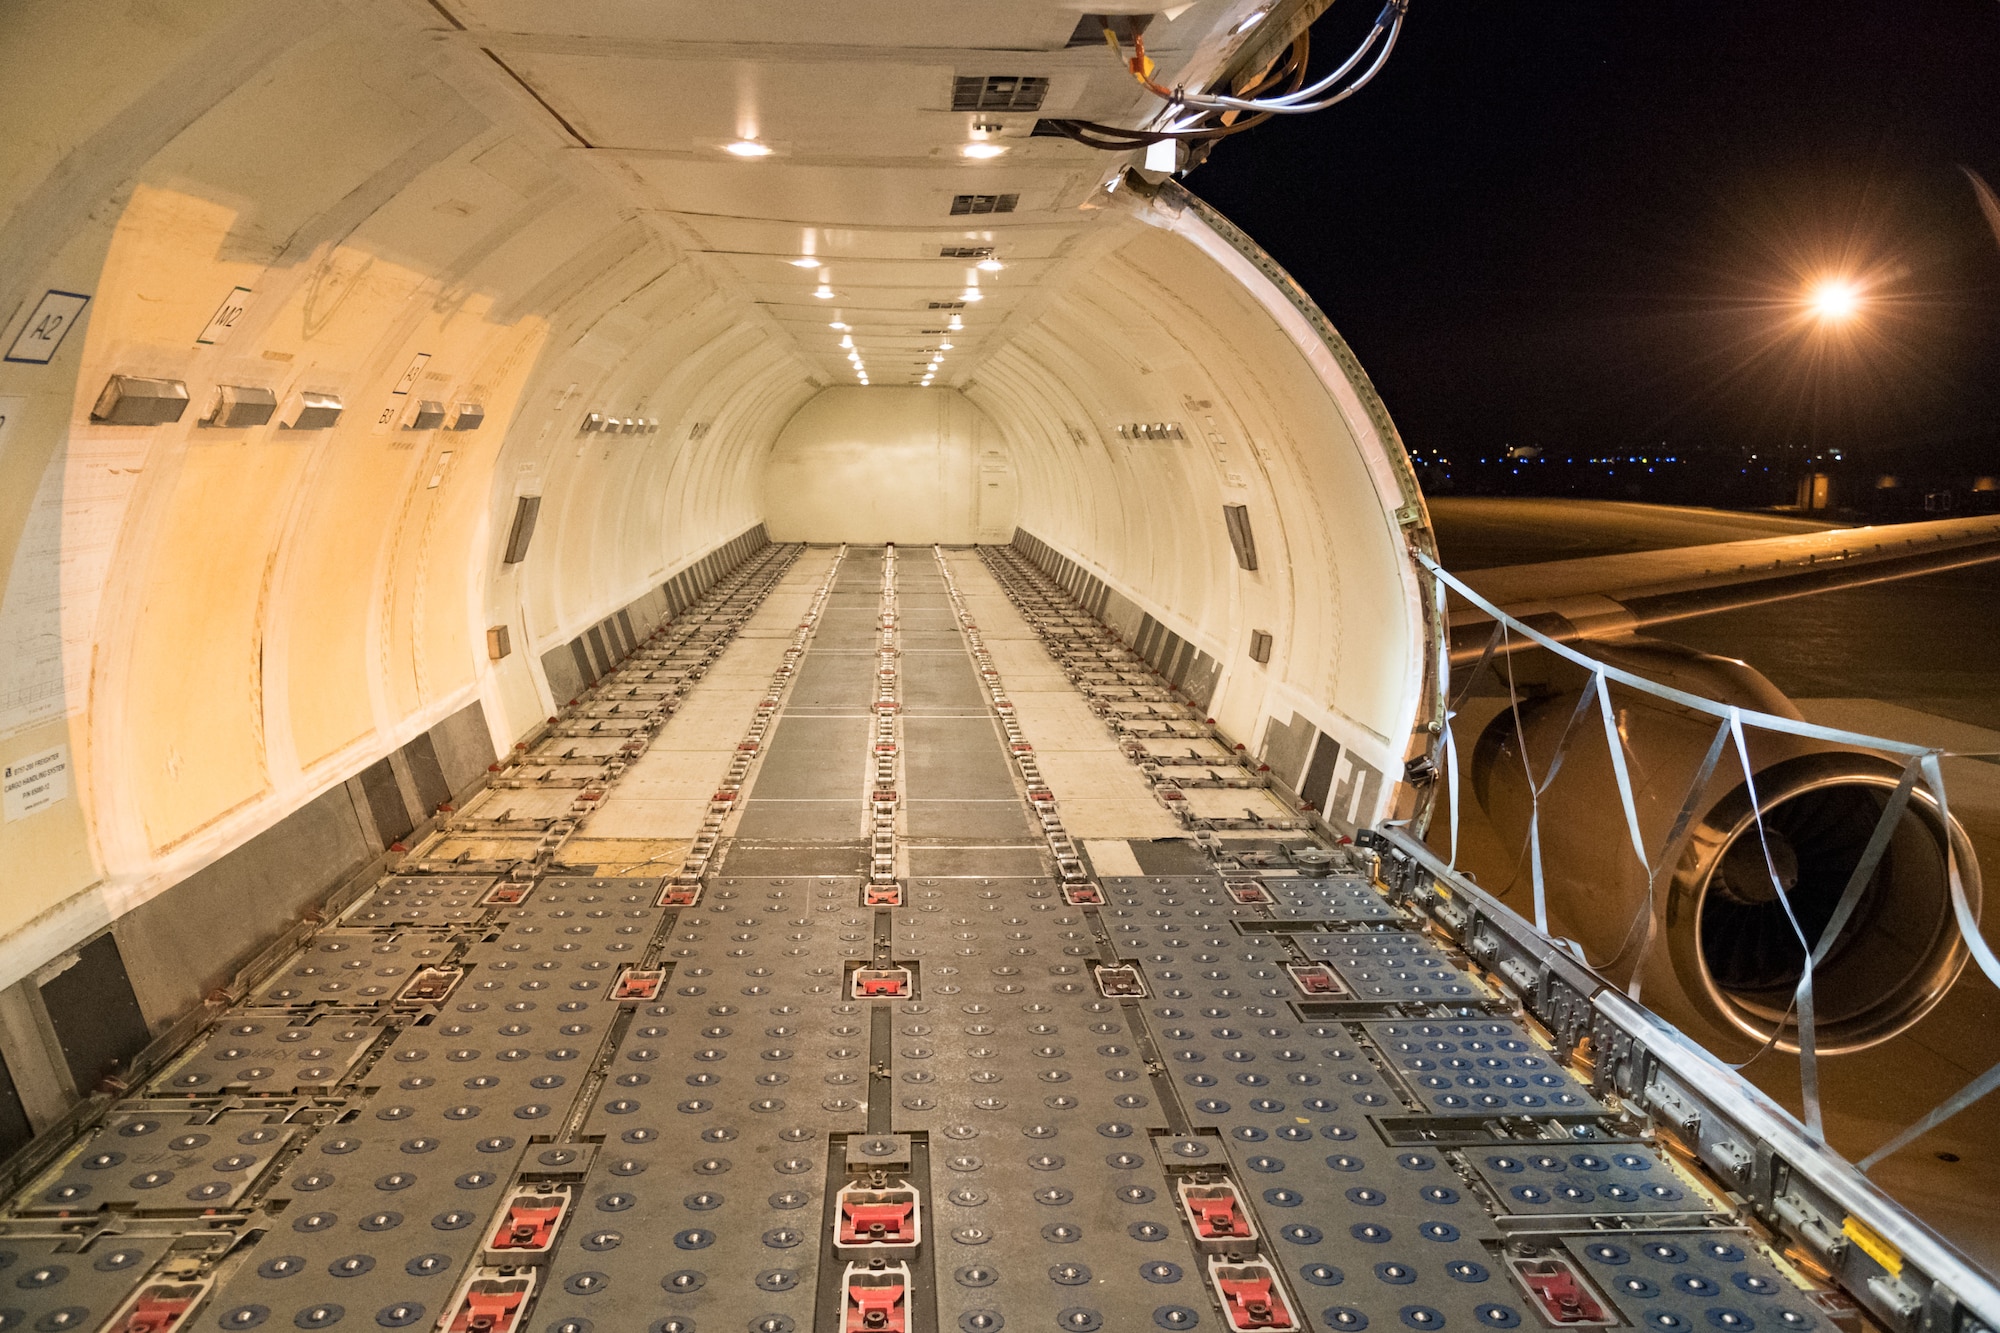 The main deck cargo area of an Air Transport International Boeing 757-200 aircraft waits to be loaded by 436th Aerial Port Squadron ramp services personnel Sept. 8, 2019, at Dover Air Force Base, Del. The ATI aircraft, part of the Civil Reserve Air Fleet program, can accommodate up to 10 pallets. This 757-200 was contracted to transport cargo and 30 Team Dover members to Fairchild AFB, Wash., participating in Mobility Guardian 2019. “This mission is multidimensional and will provide a greater understanding of the commercial airlift capabilities and requirements across Air Mobility Command and the commercial airlift enterprise,” said Maj. Adam Crane, AMC Headquarters CRAF Branch Chief, Scott AFB, Ill. (U.S. Air Force photo by Roland Balik)